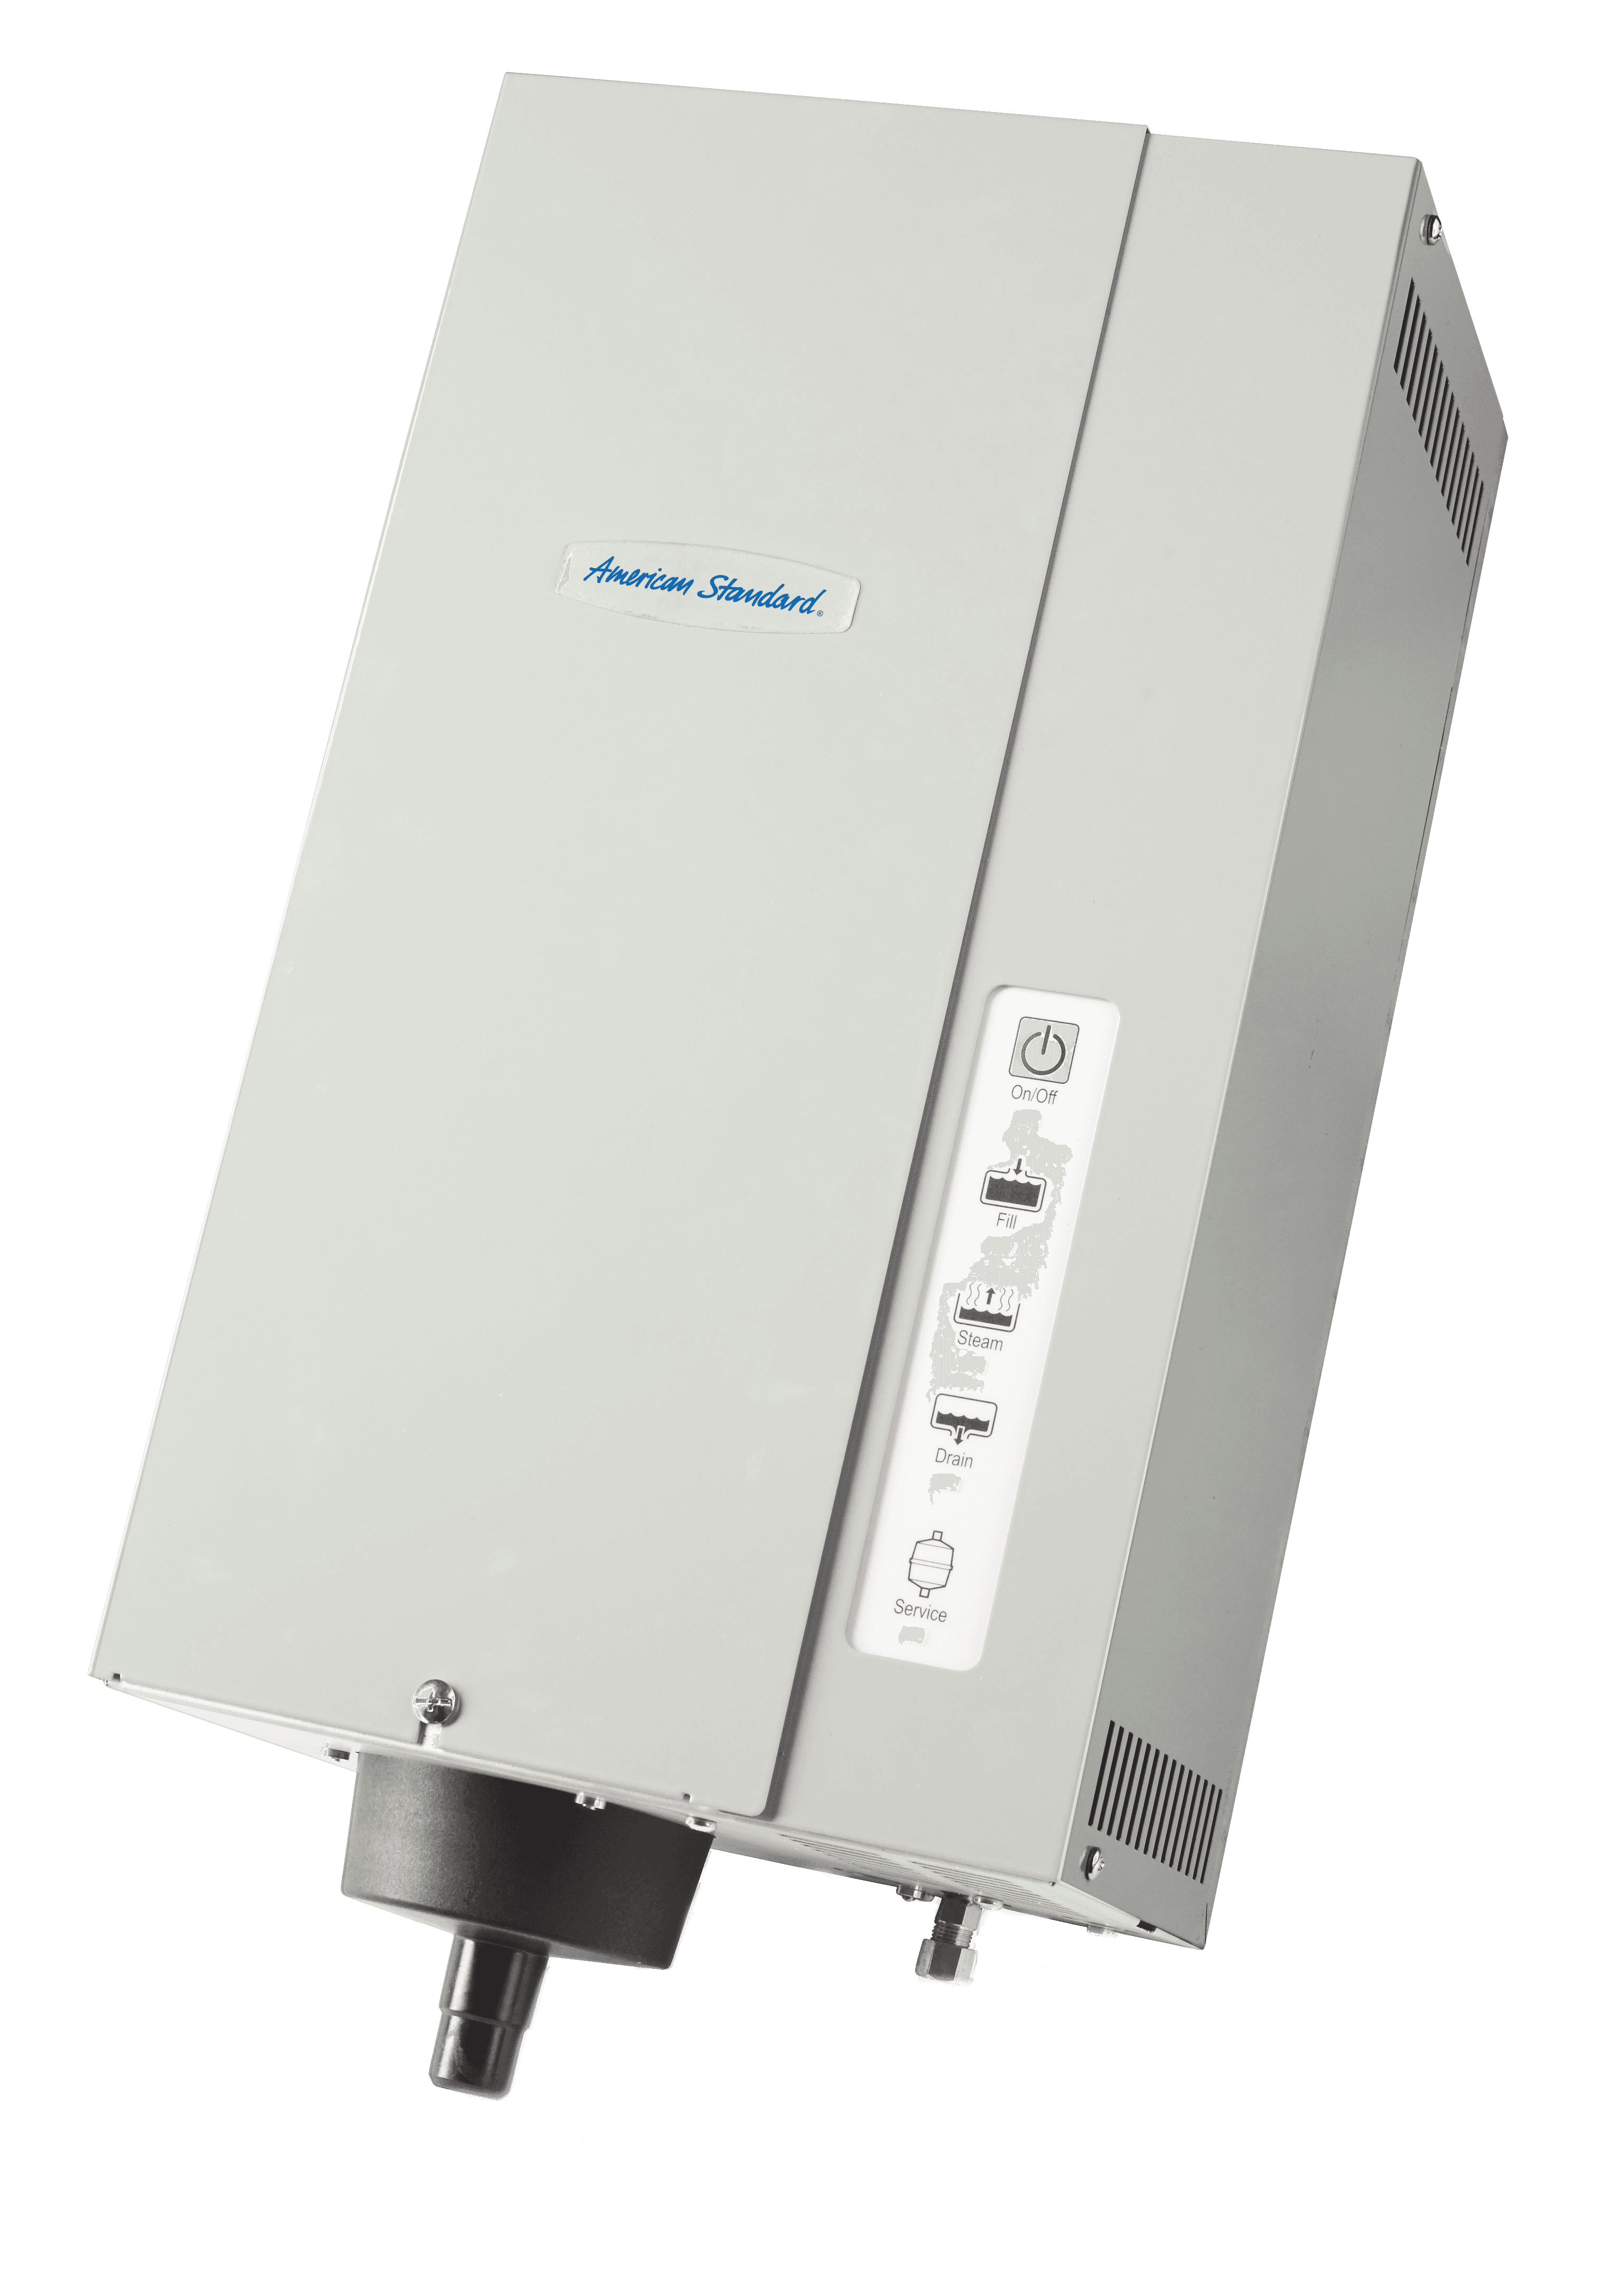 Residential and Commercial Water Heaters - American Standard